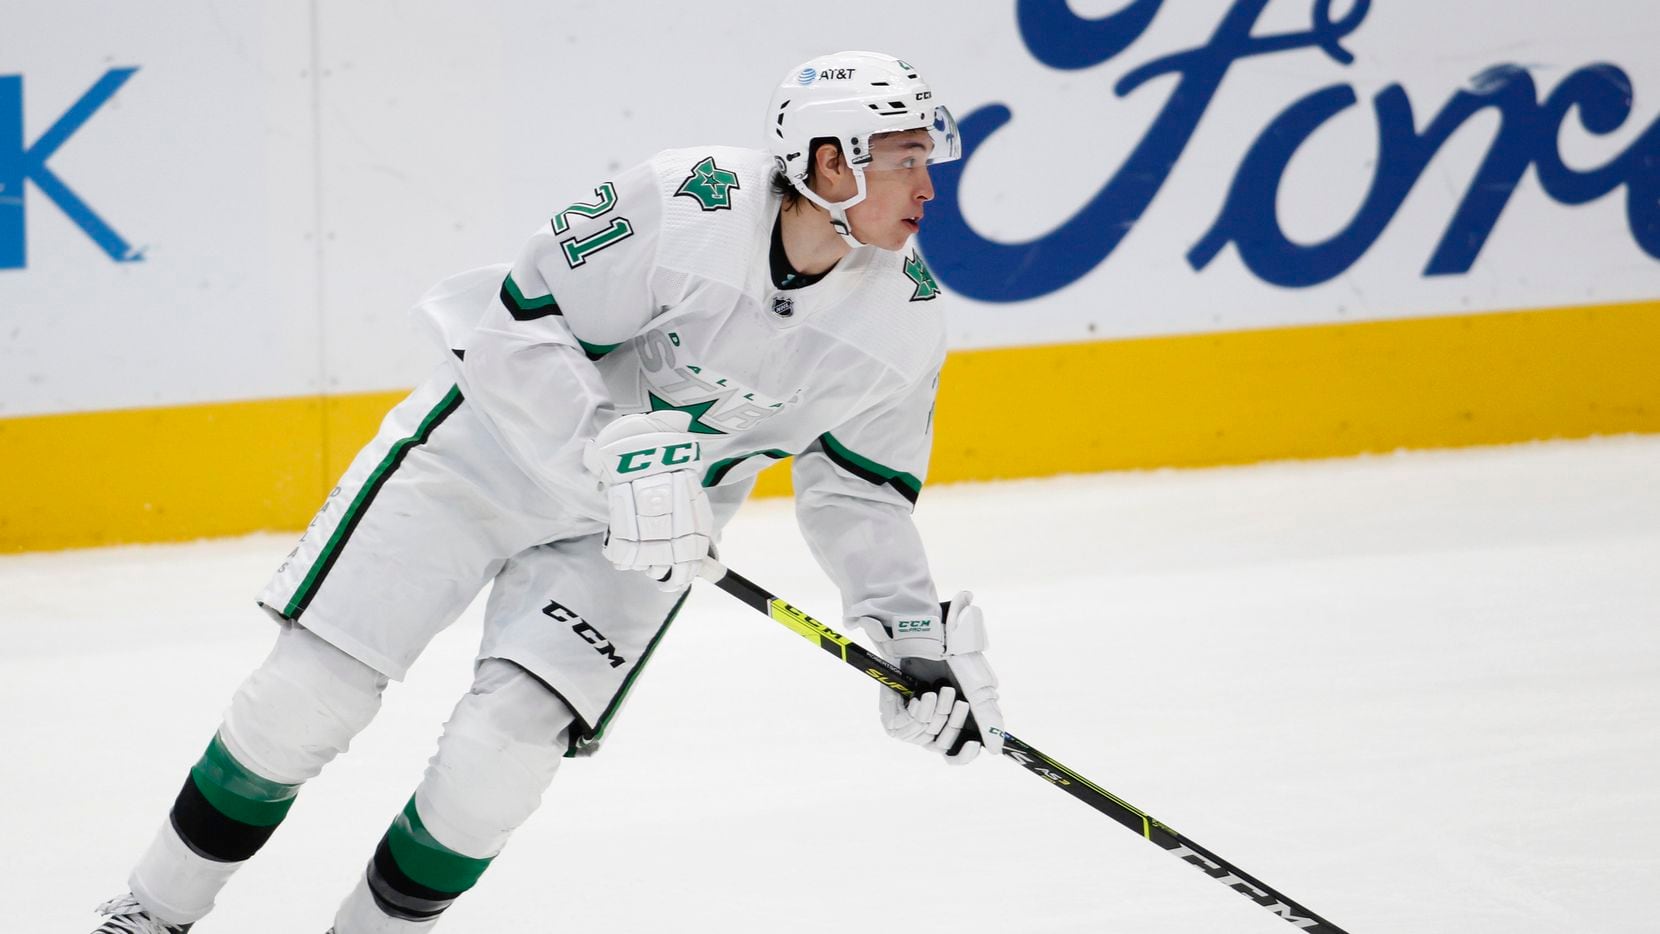 Dallas Stars' Jason Robertson (21) controls the puck during first period play against the Detroit Red Wings. The two teams played their NHL game at the American Airlines Center in Dallas on April 20, 2021.